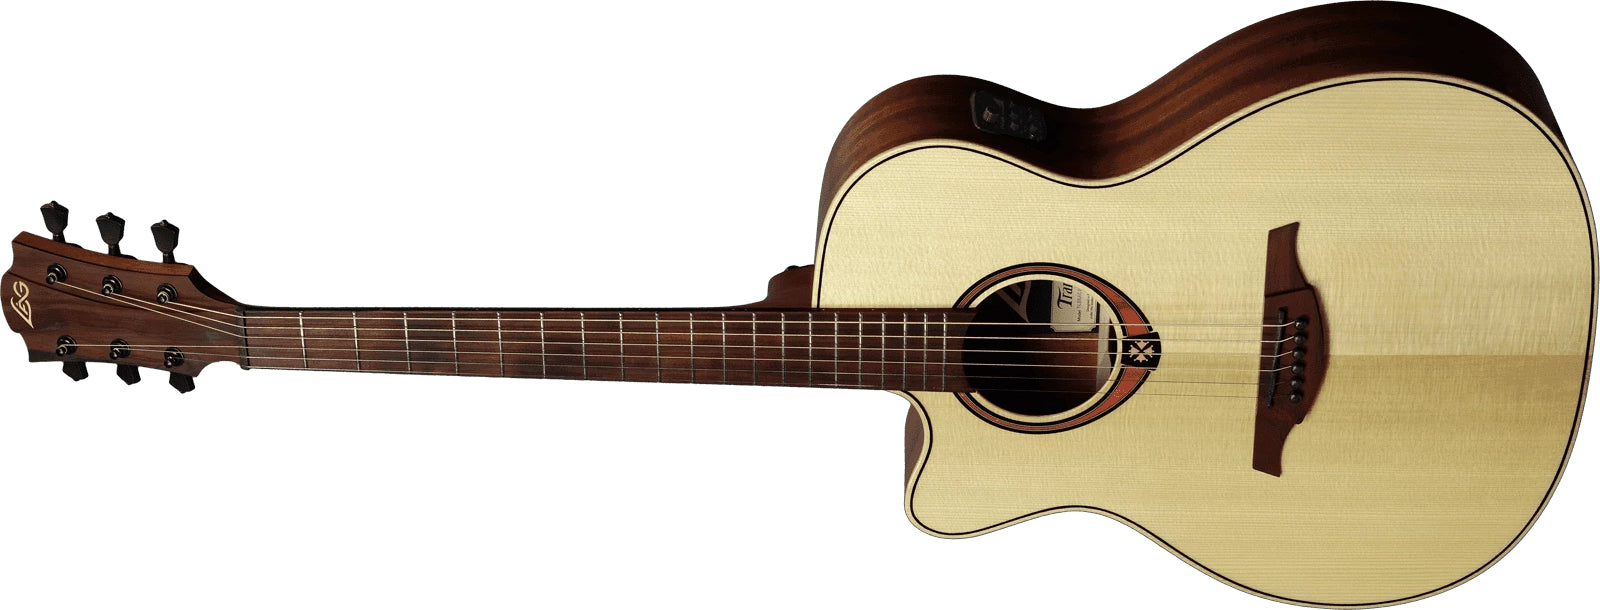 LAG TRAMONTANE 88 TL88ACE LEFTY AUDITORIUM CUTAWAY ELECTRO, Electro Acoustic Guitar for sale at Richards Guitars.